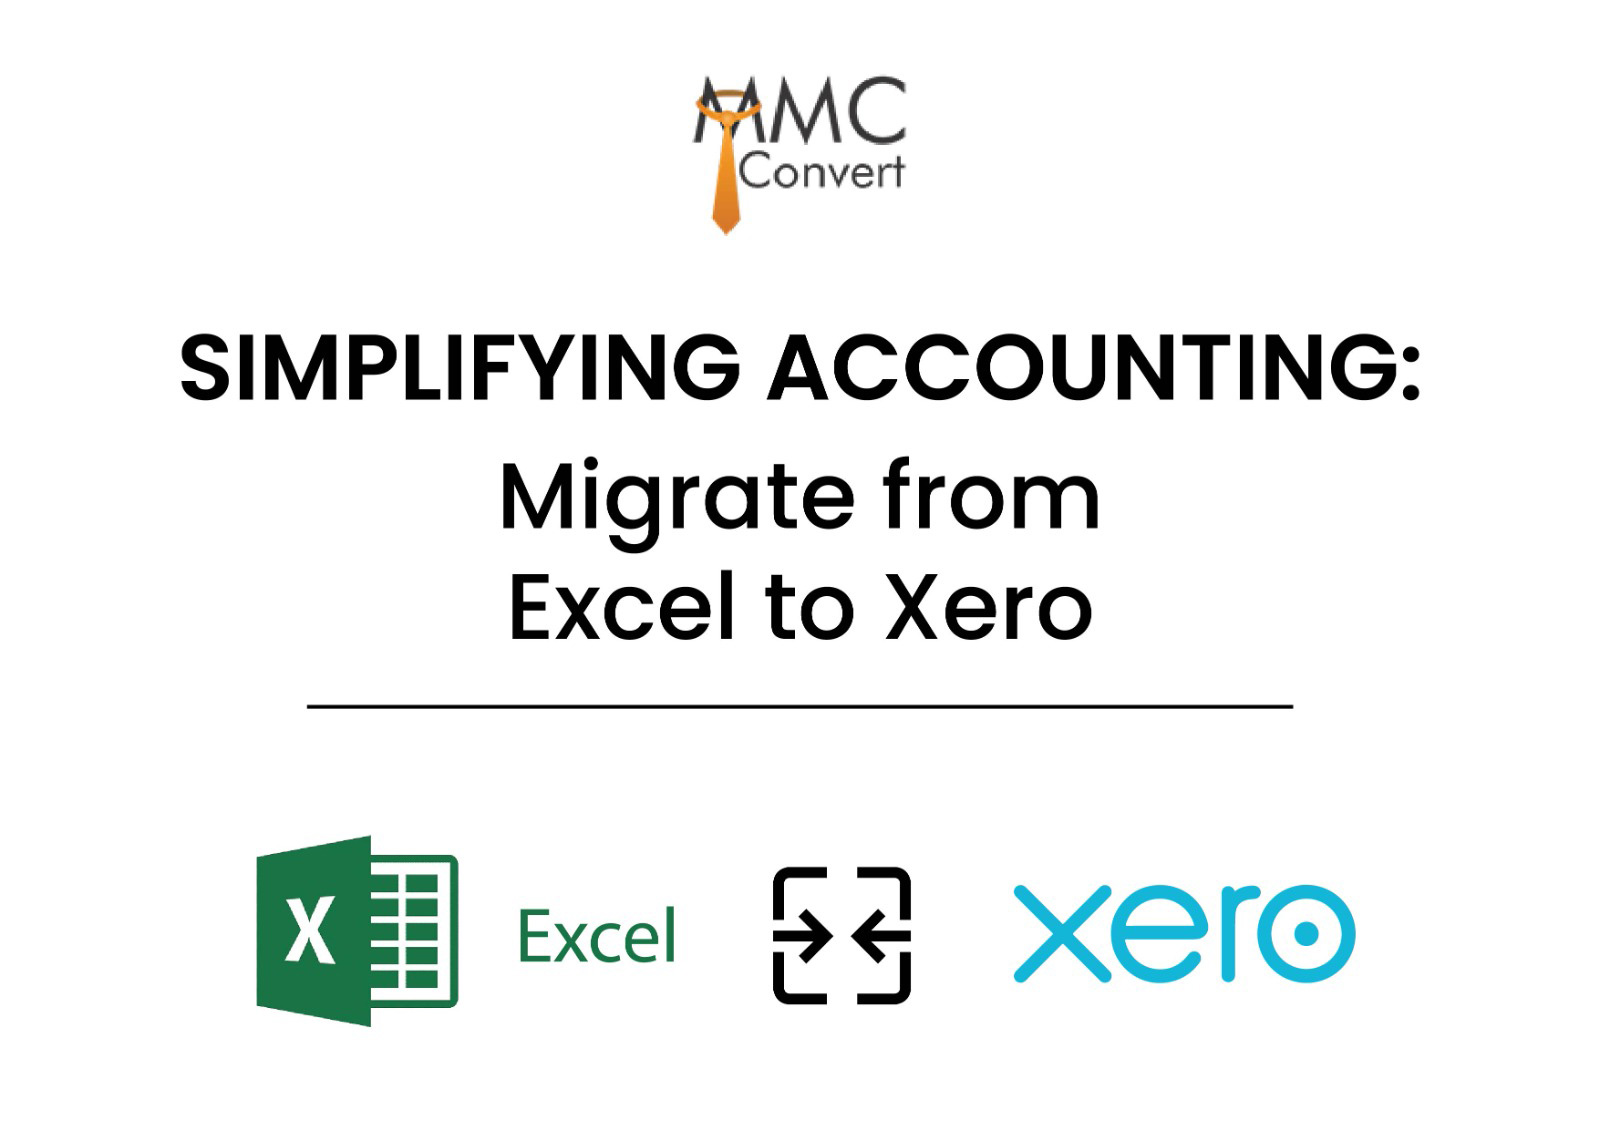 Simplifying Accounting: Migrate from Excel to Xero